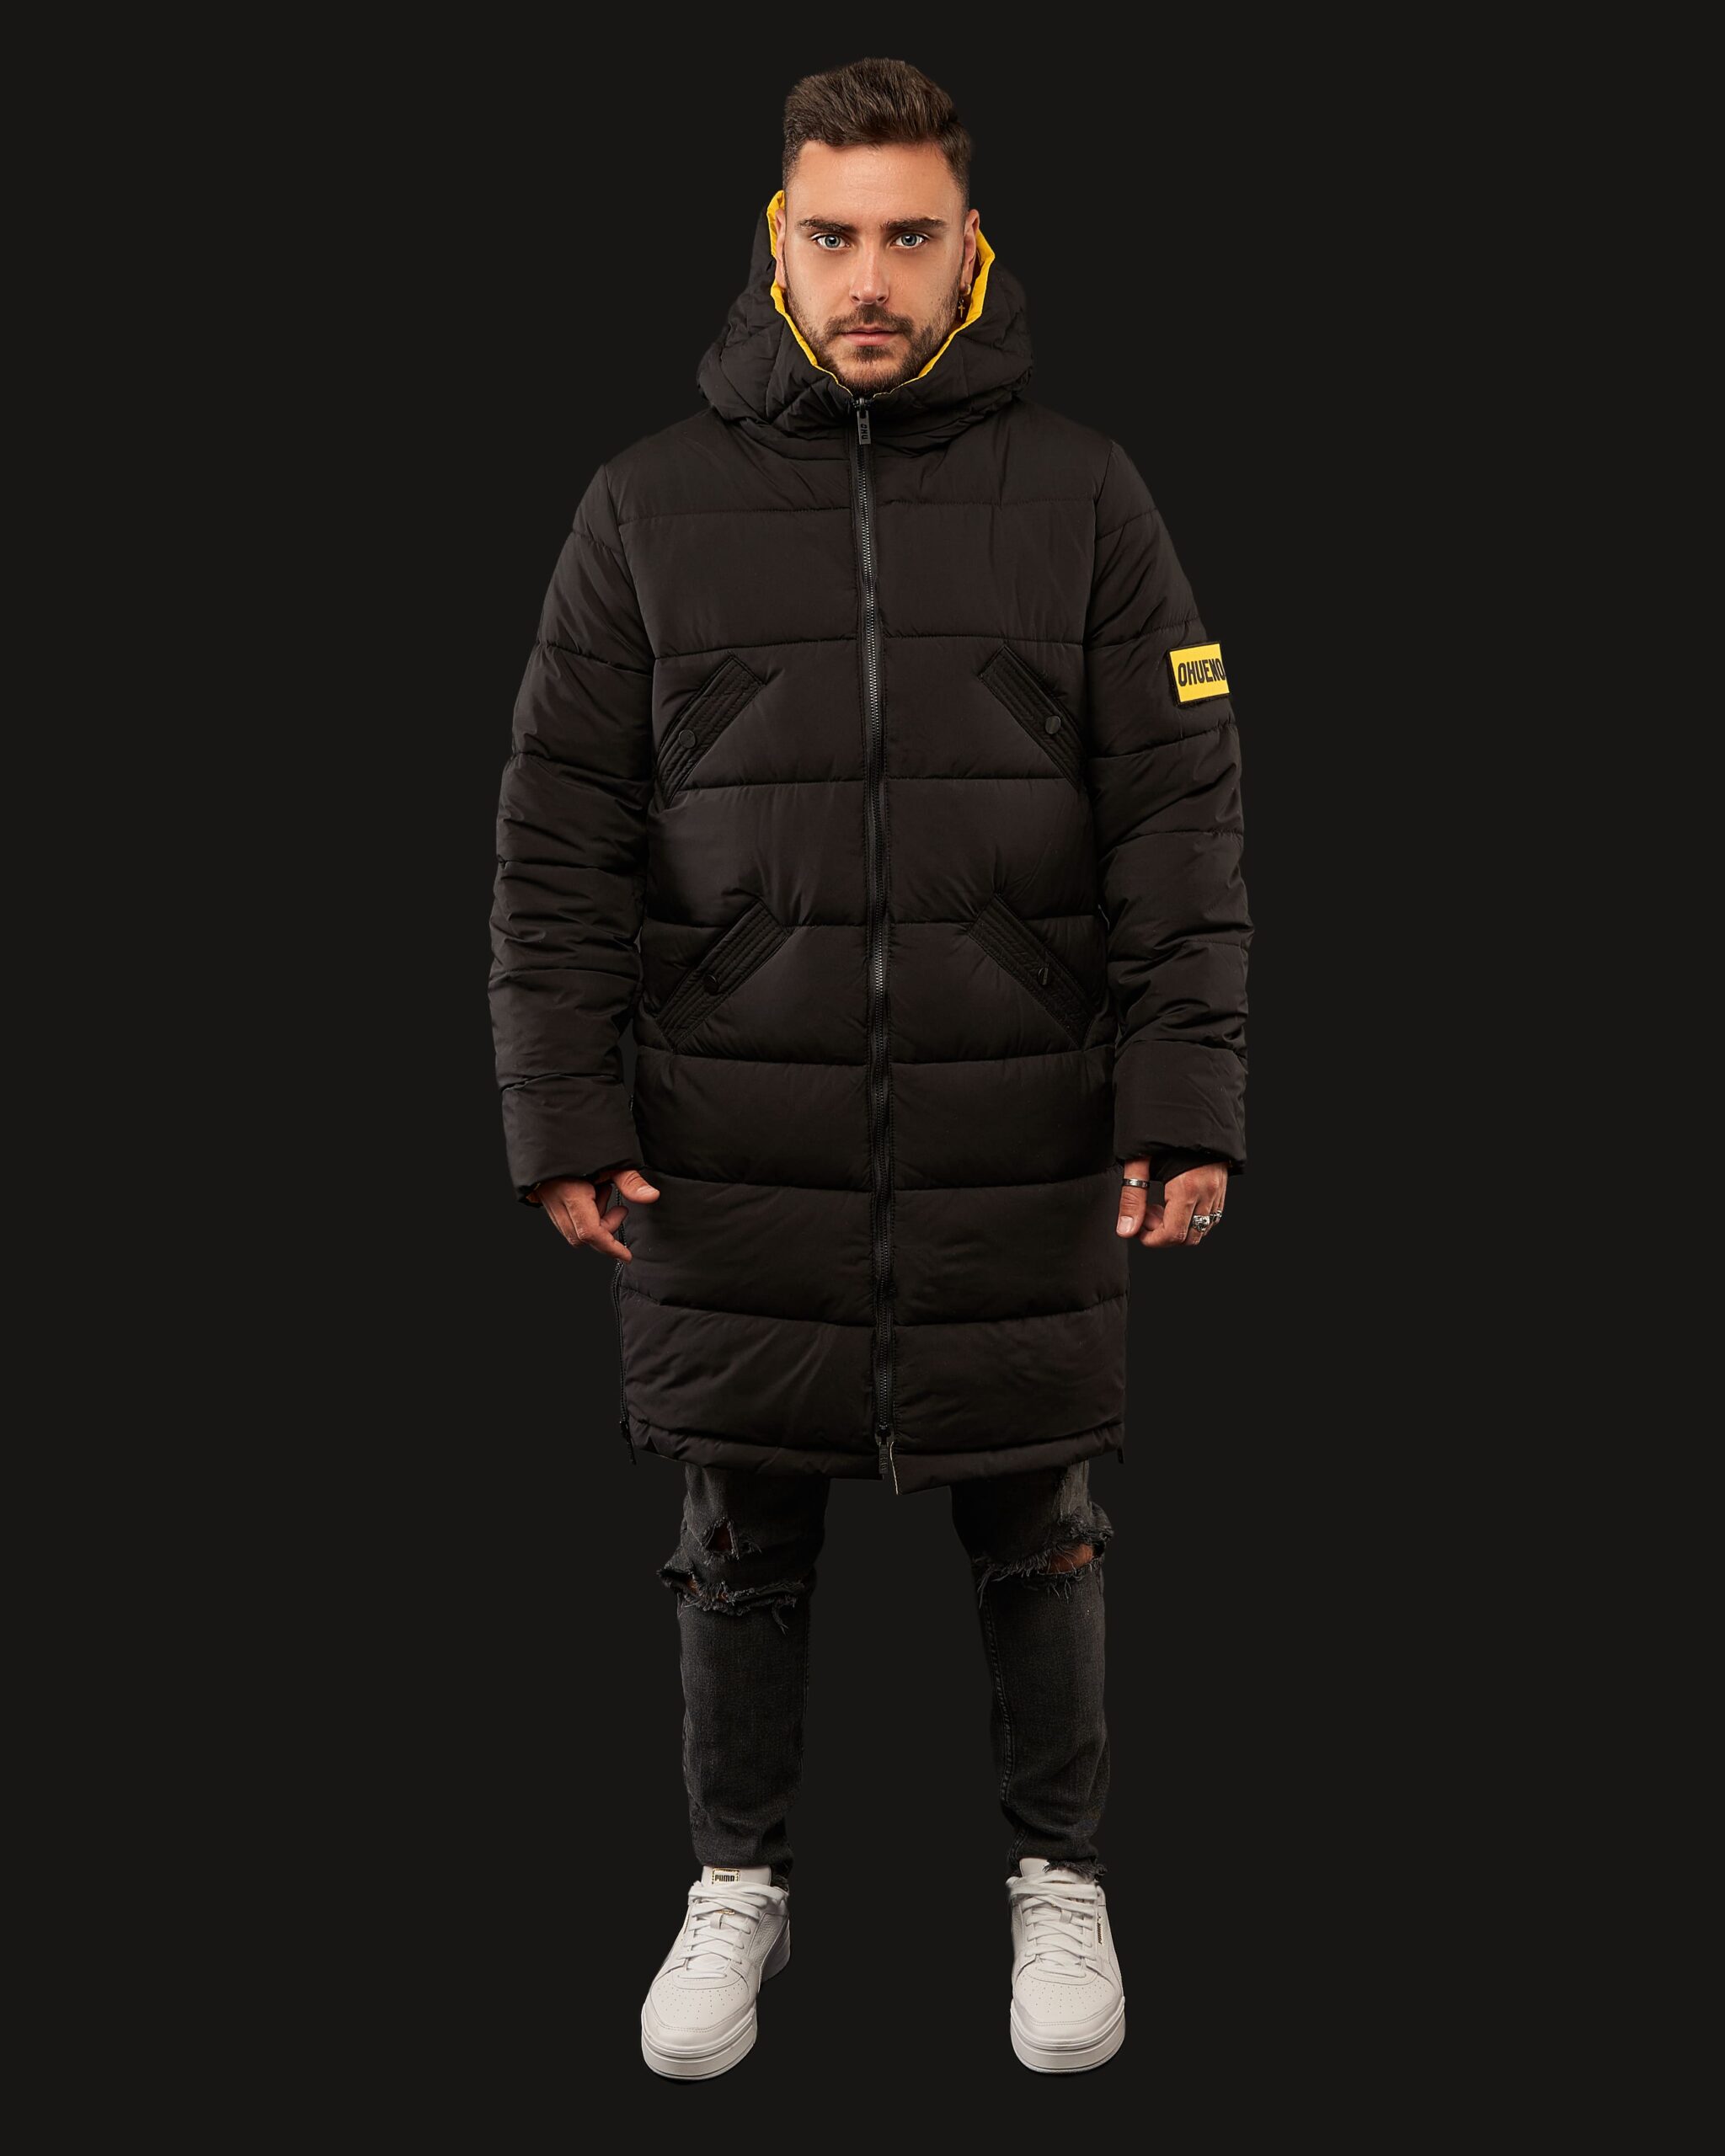 Down jacket Image: https://ohueno-official.com/wp-content/uploads/m01257-scaled.jpg